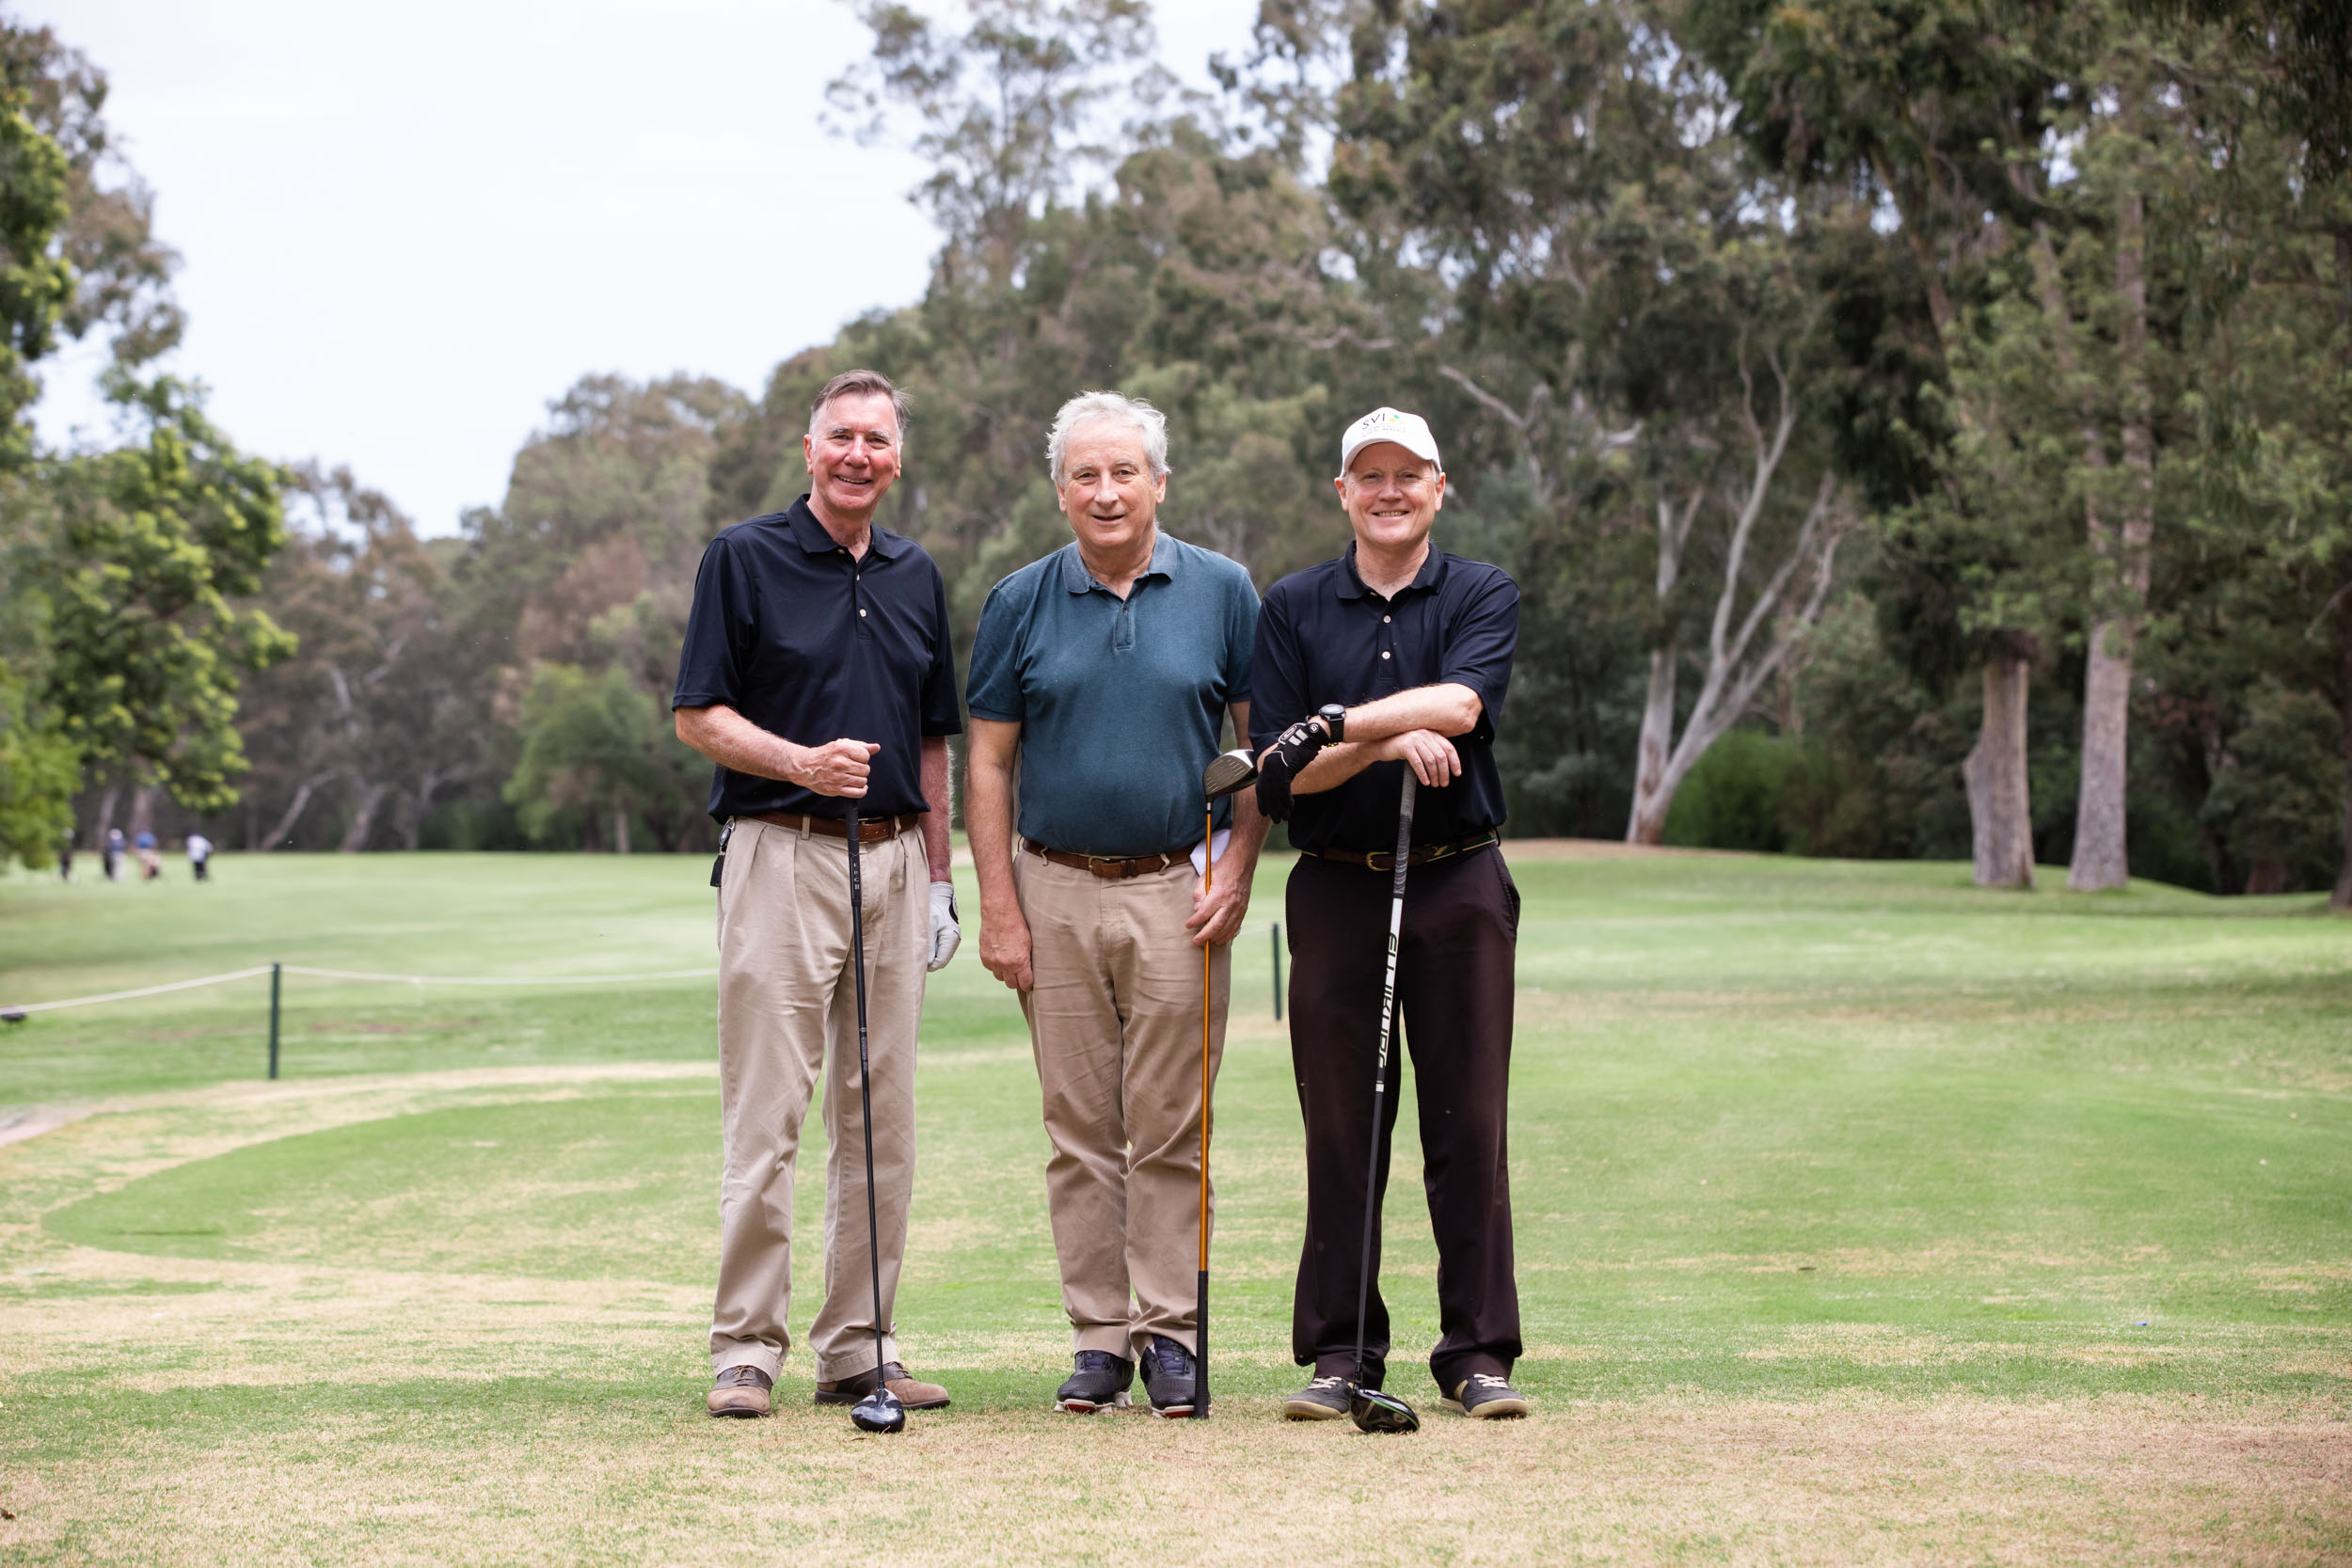 Swinging for Science – Meet our Golf Day Sponsors